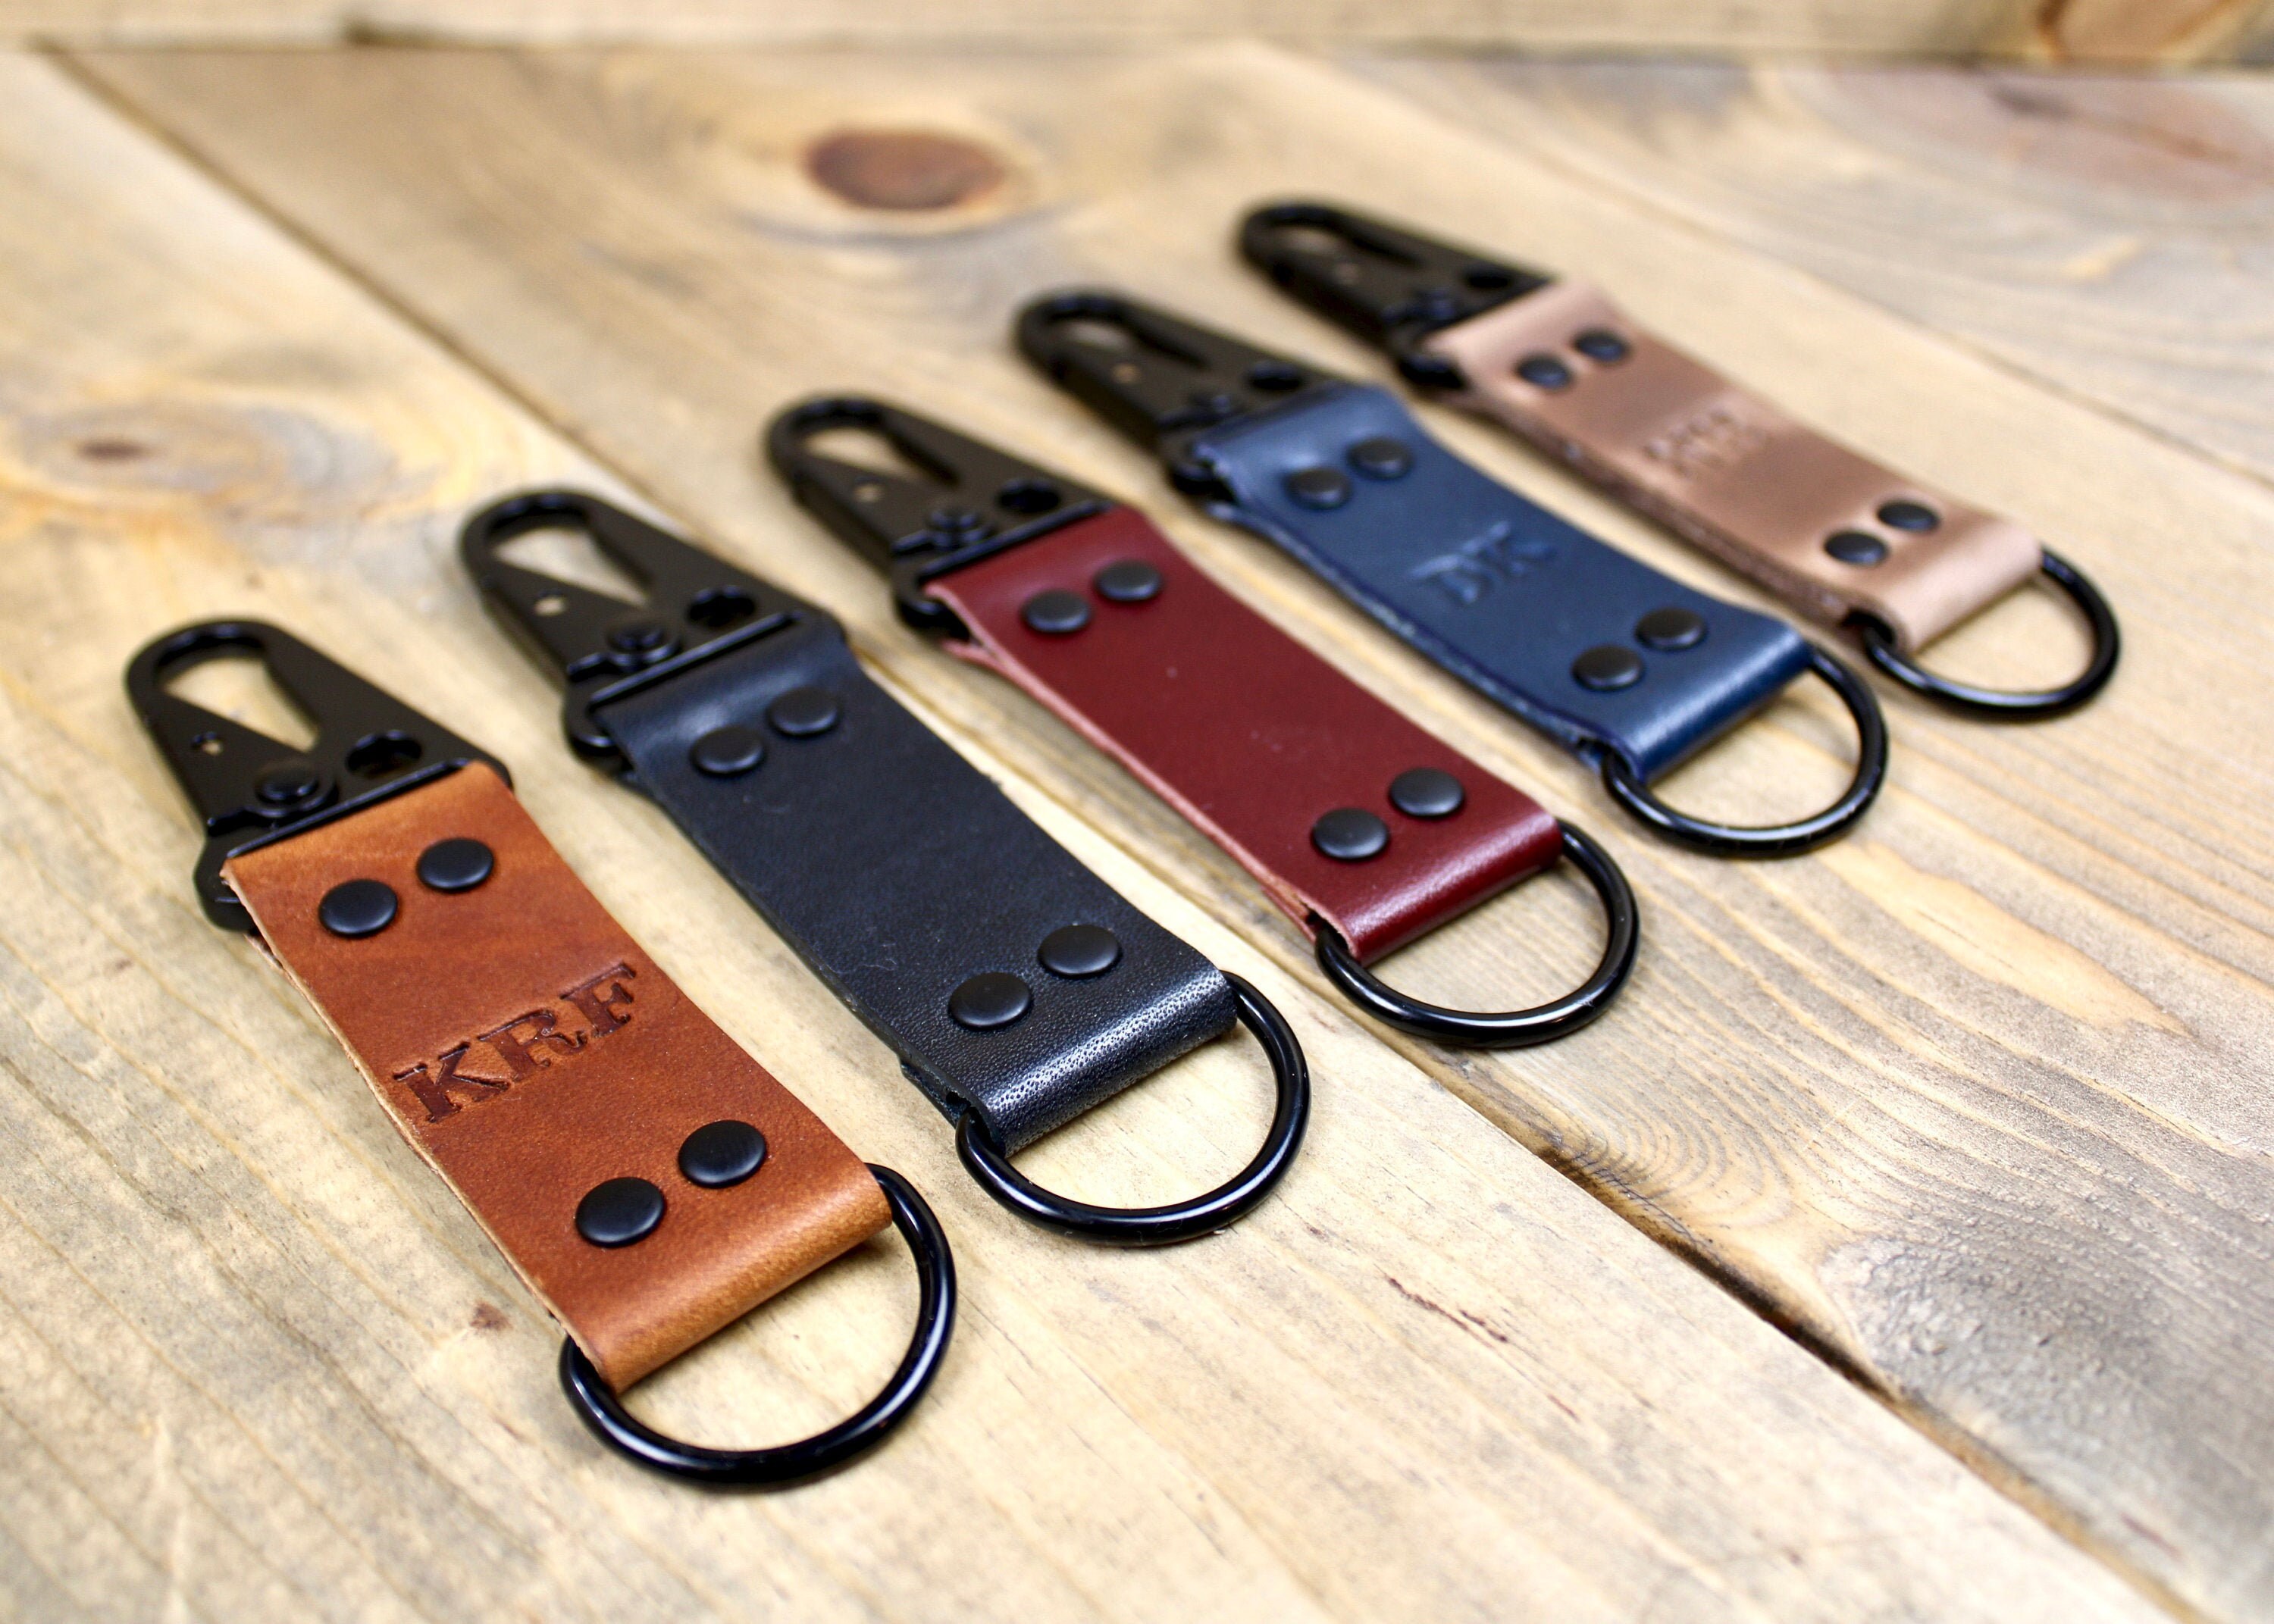 Men Leather Belt Loop Keychain with 2 Detachable Clips Key Holder Jewelry  Charms Belt Key Chain Car Key Ring Gifts 